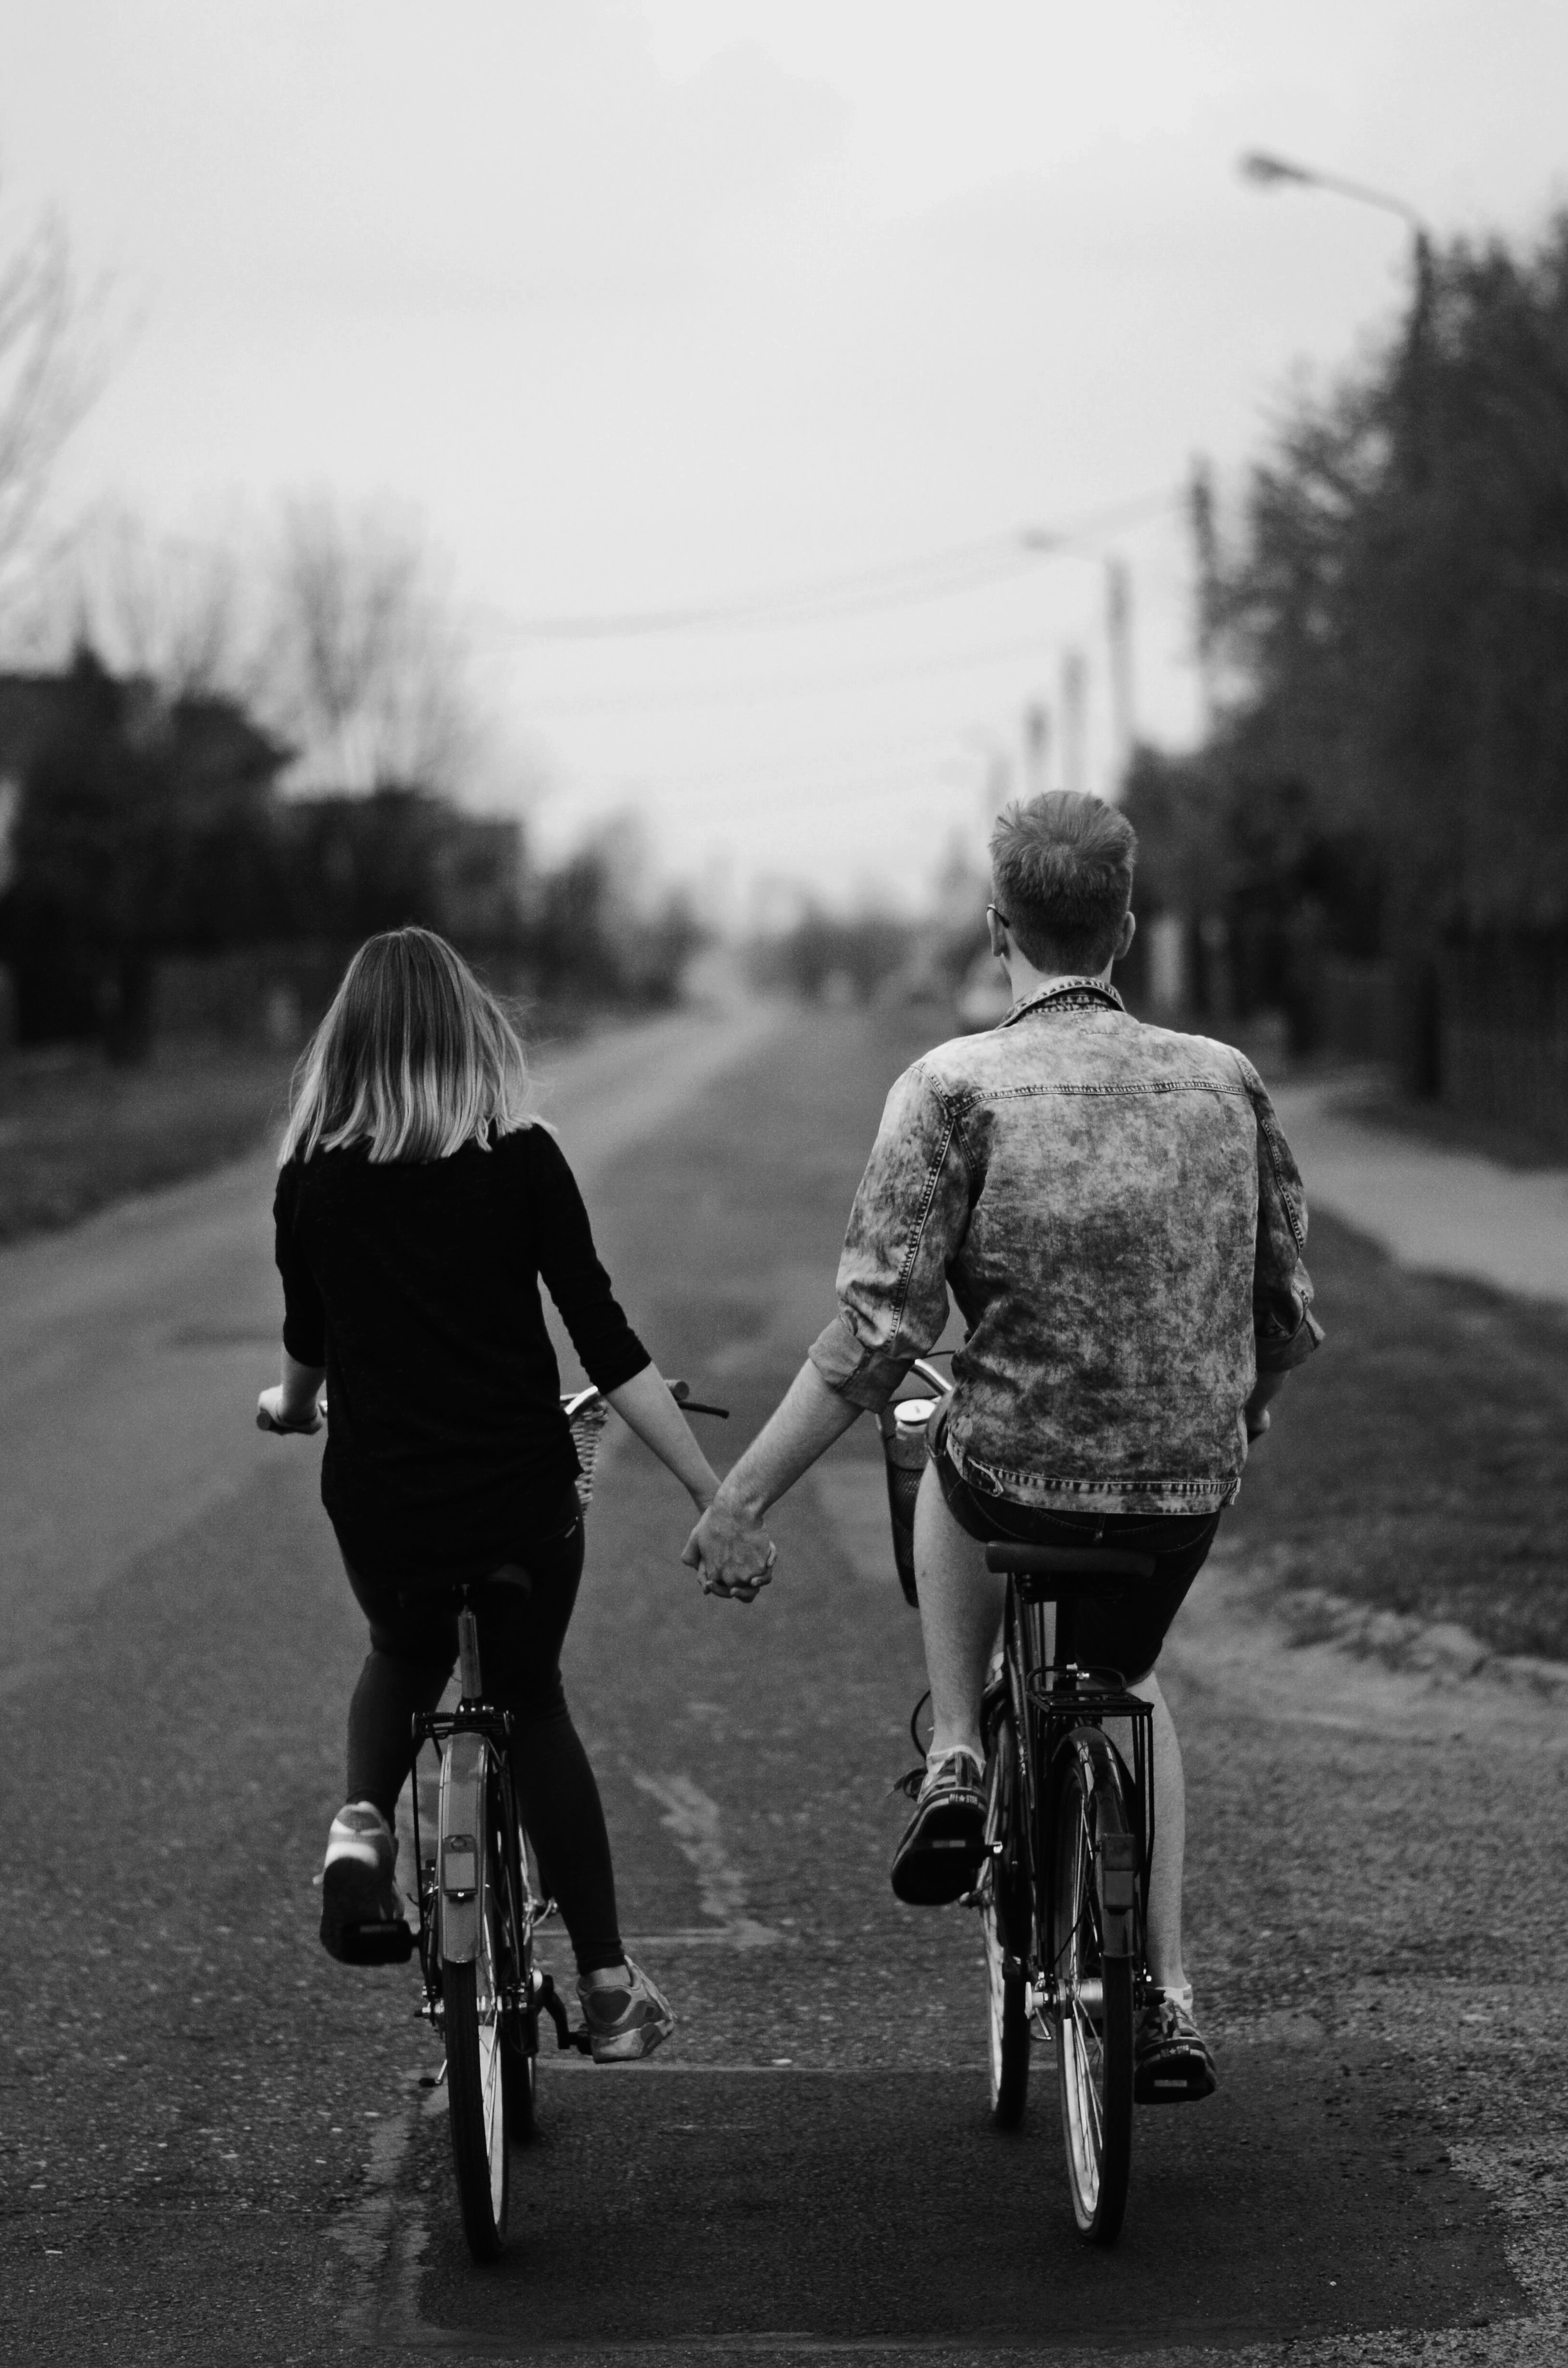 A couple riding on bikes together